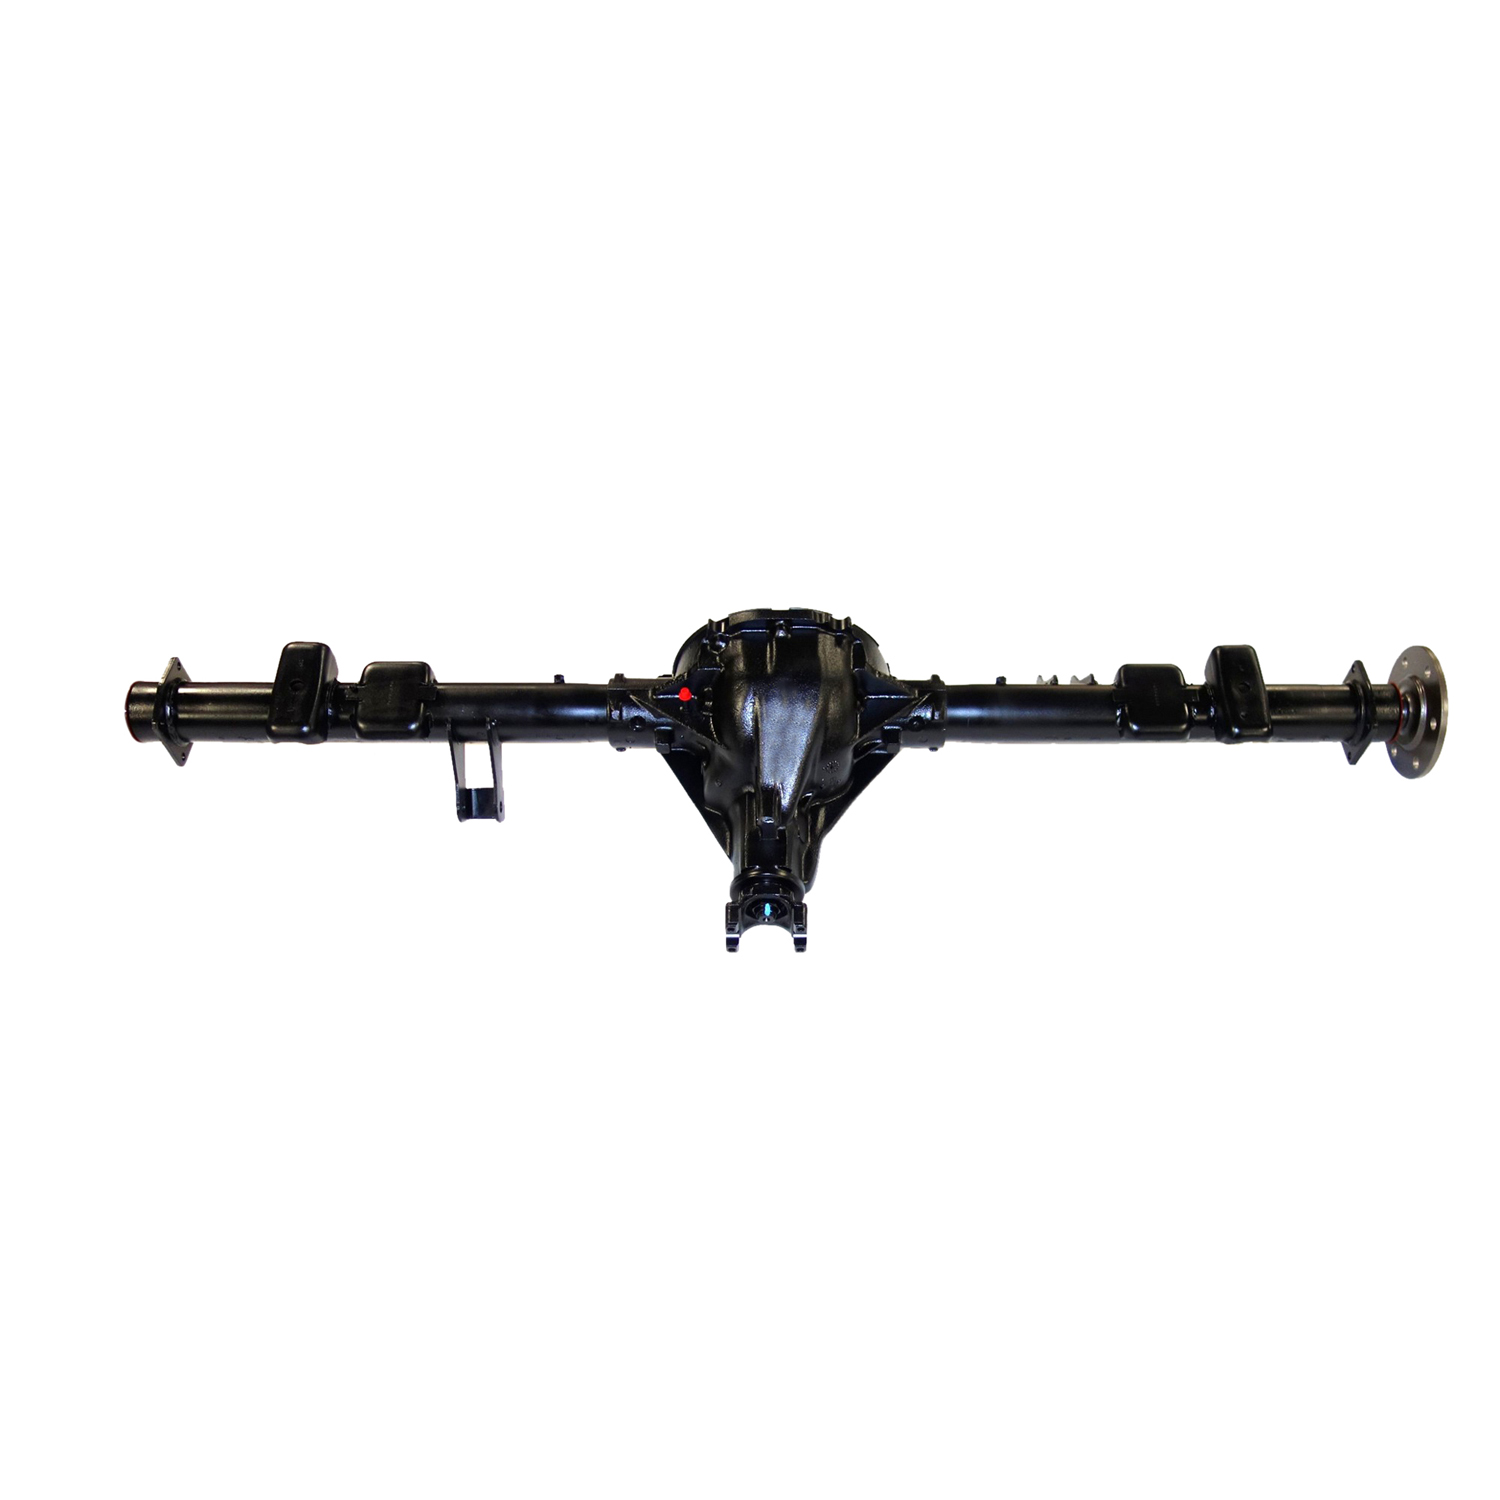 Remanufactured Axle Assy for GM 8.5" 92-94 GM Suburban 1500, 2wd, 3.42 , Posi LSD